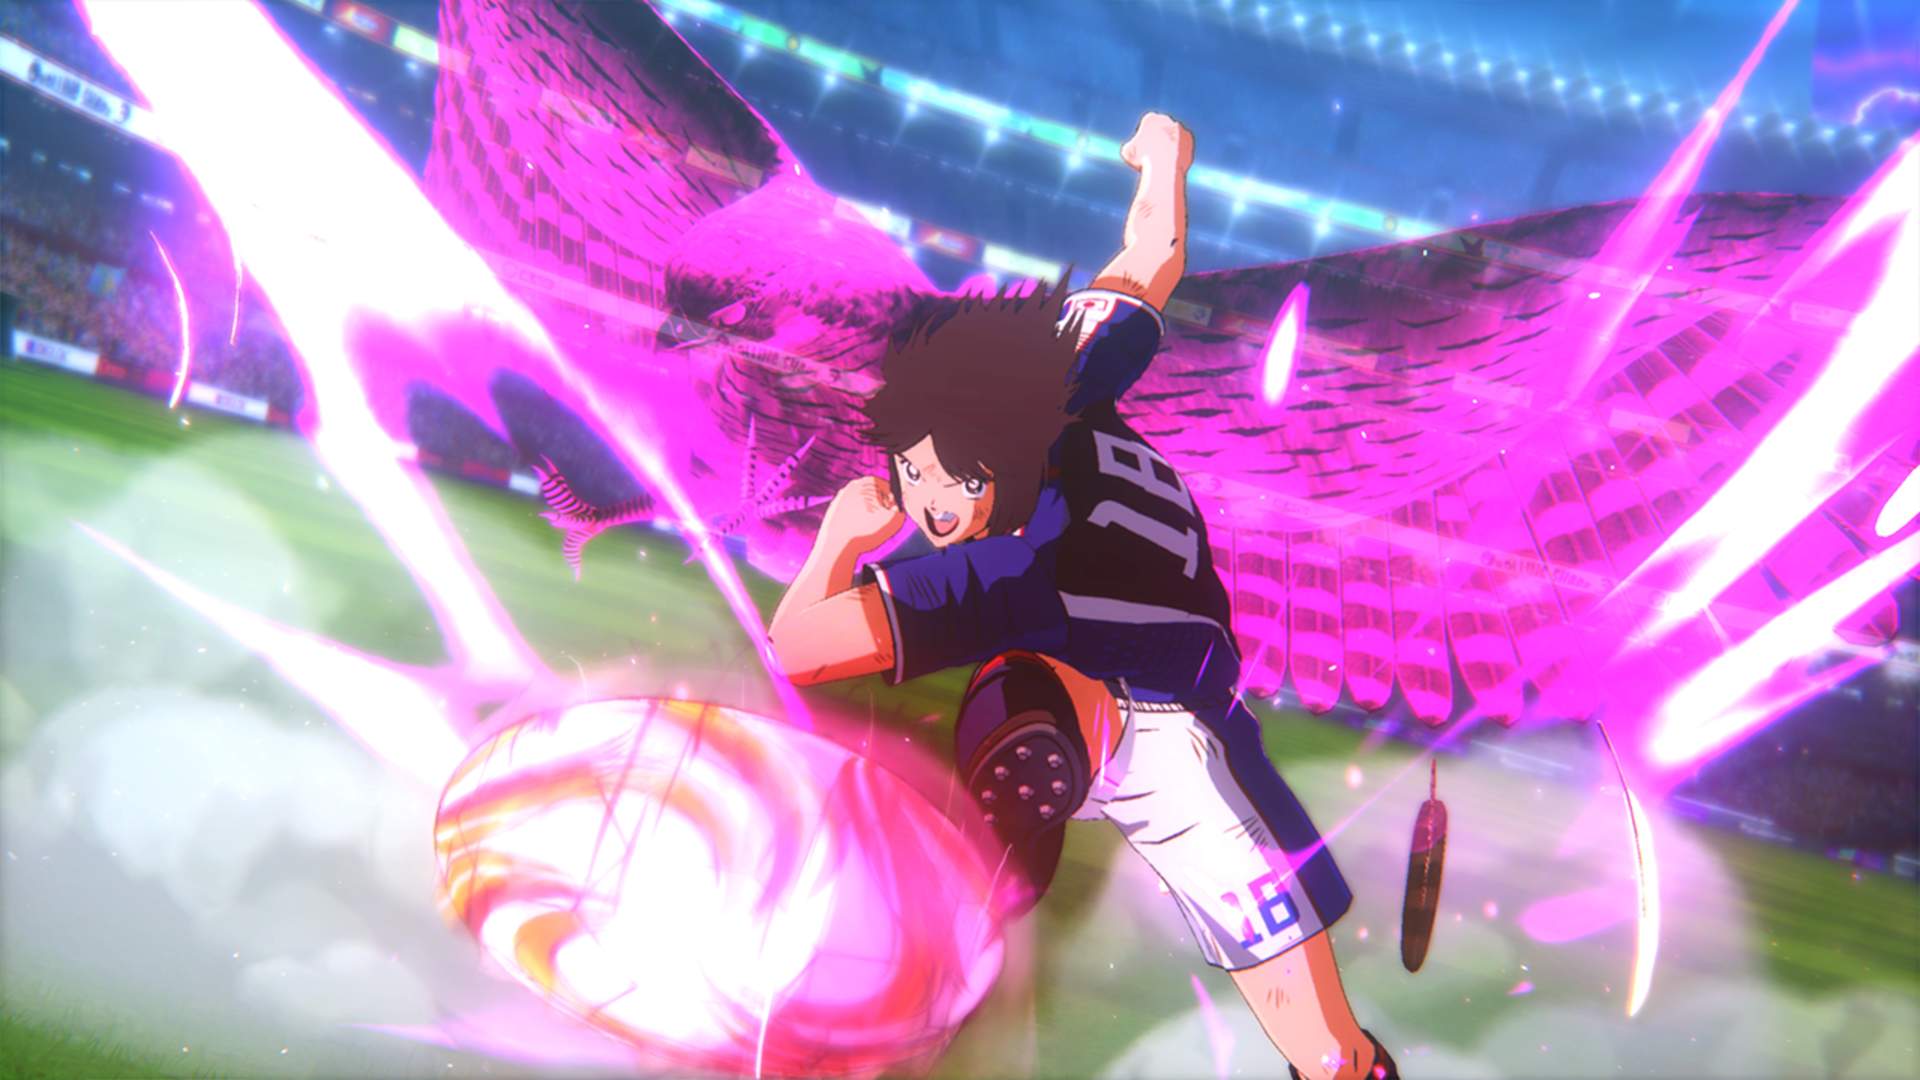 Captain Tsubasa: Rise of New Champions was originally going to be